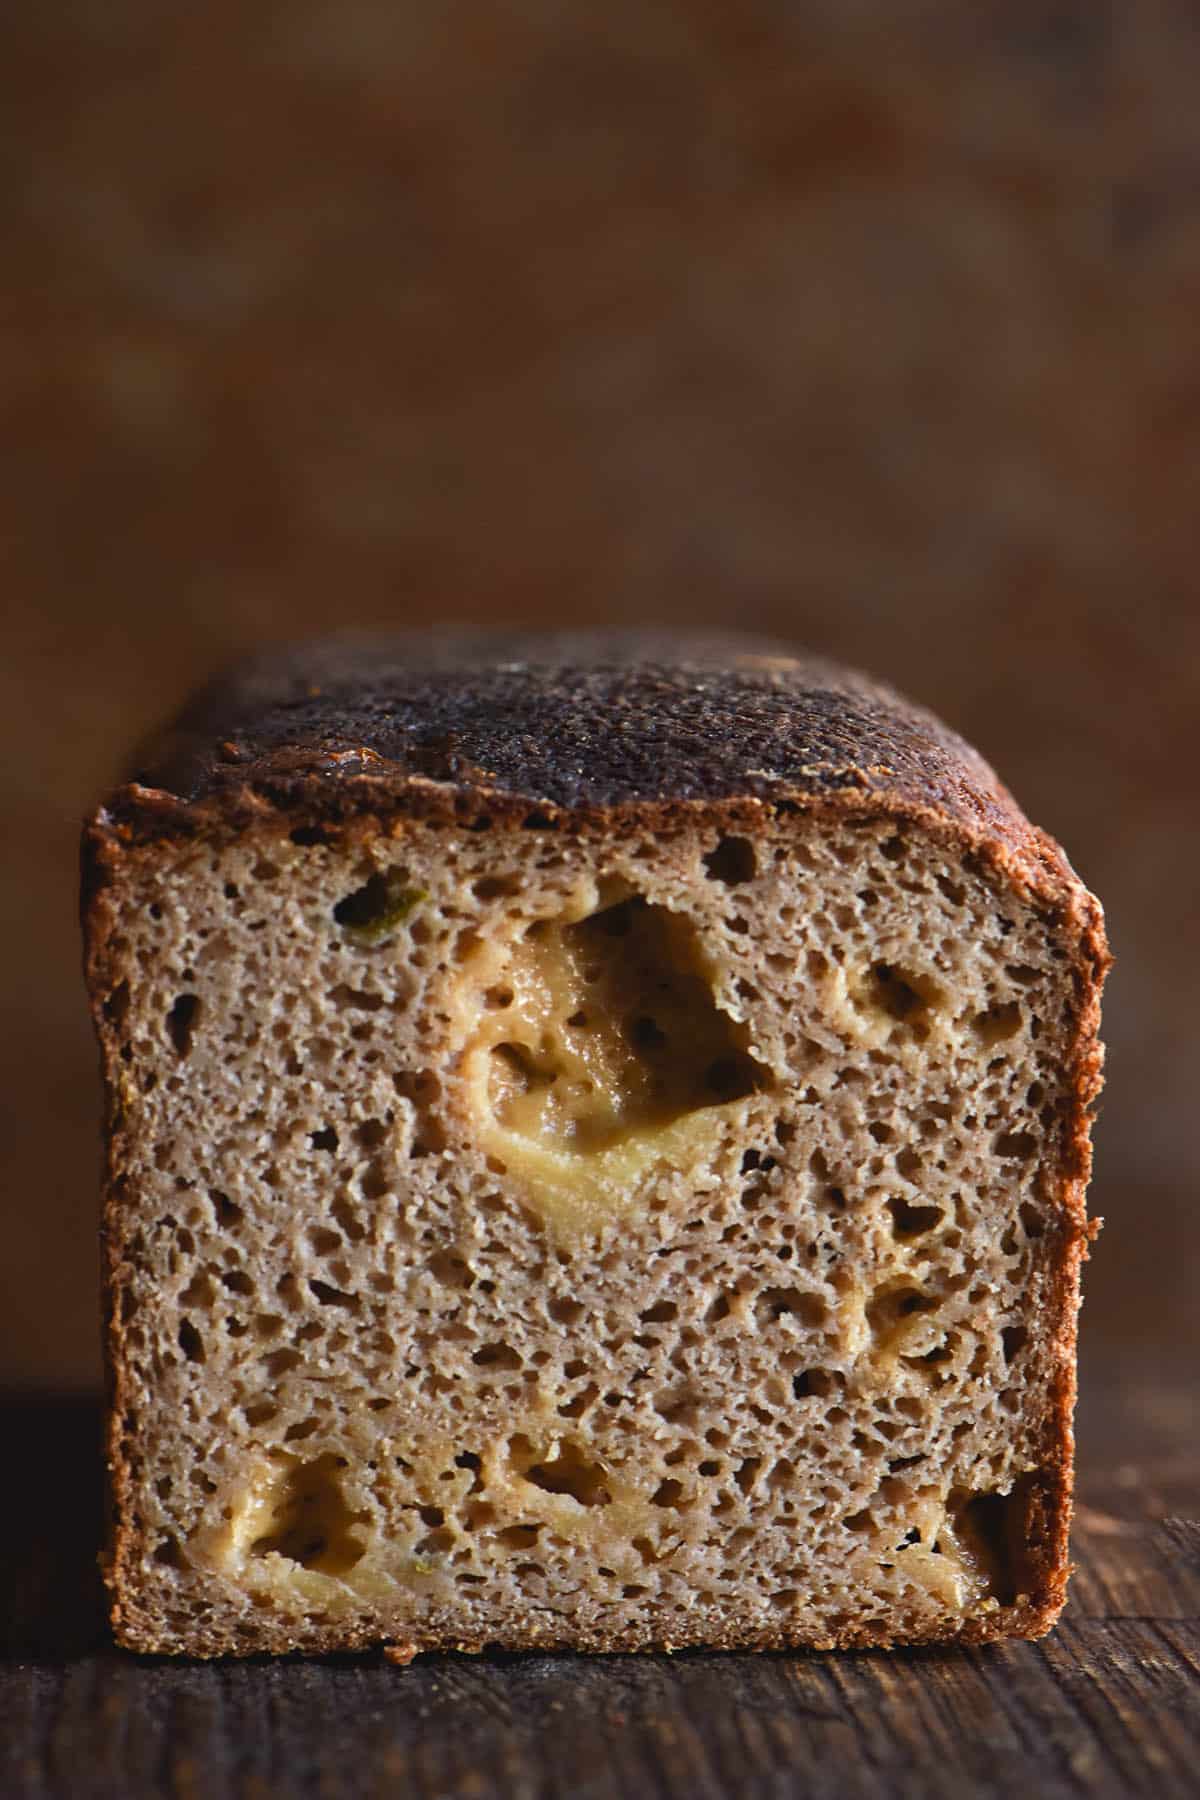 A side on image of a loaf of gluten free jalapeno and cheddar sourdough. The loaf has been sliced, revealing the cheesy crumb inside. It sits against a dark auburn steel backdrop. 